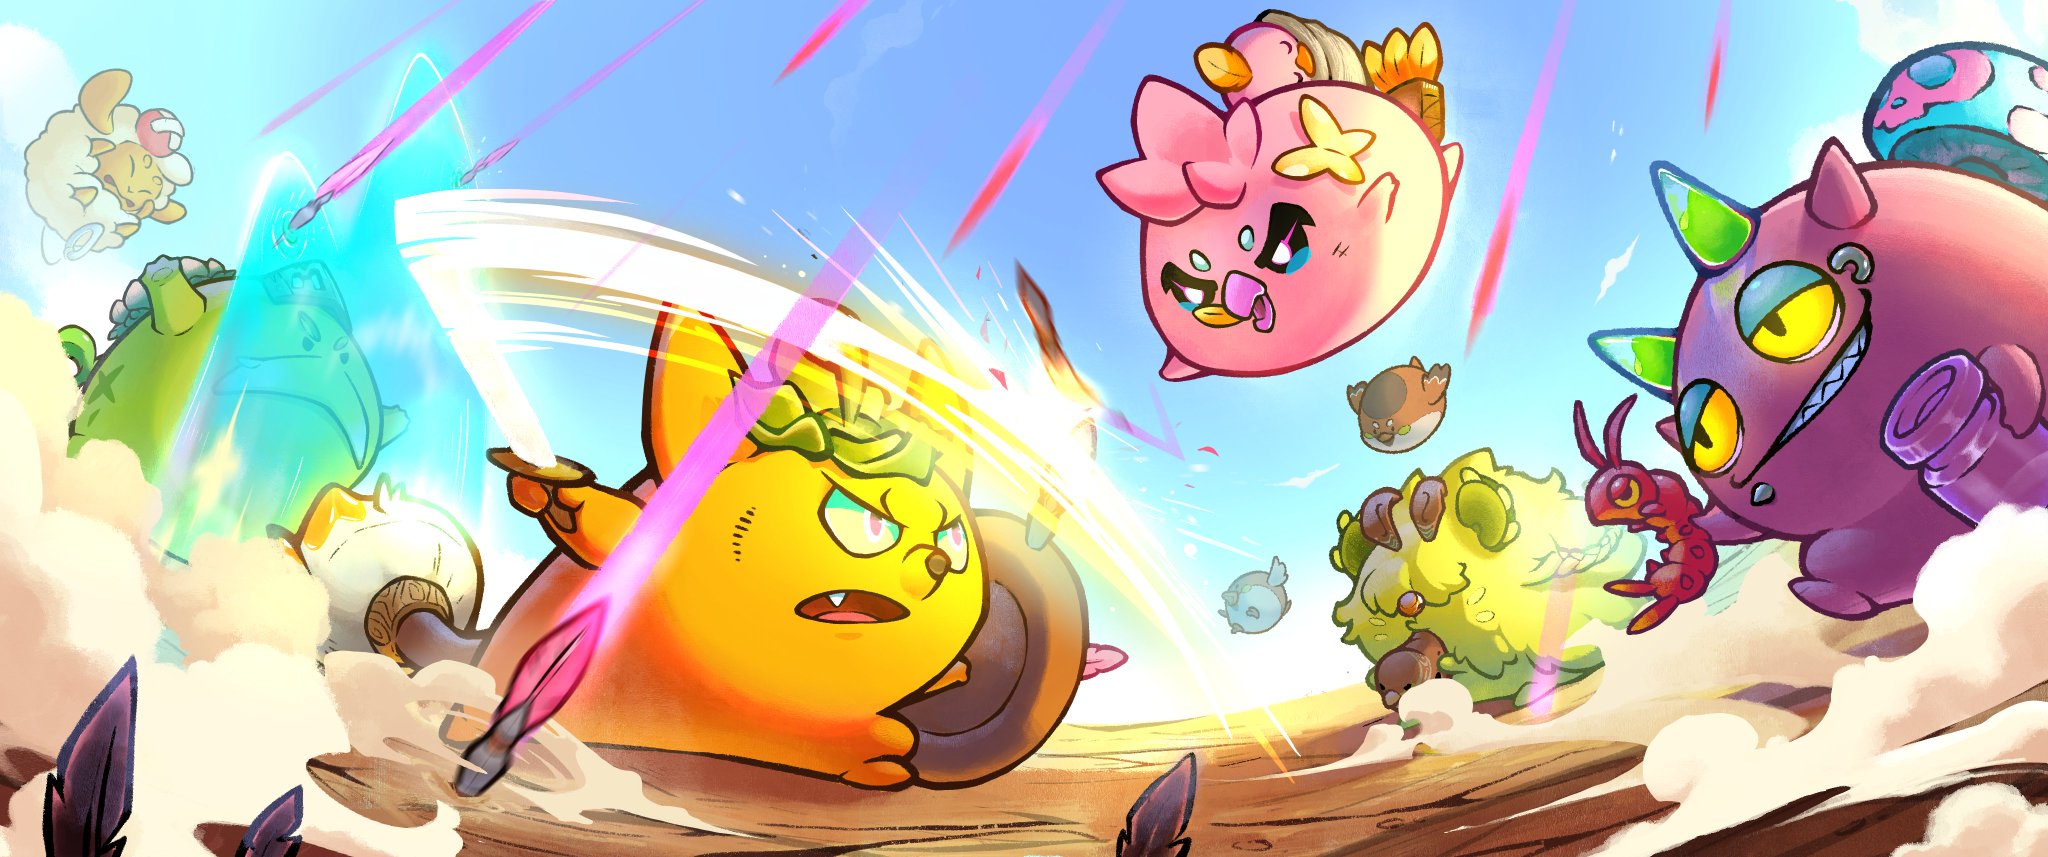 🎉 Origin is LIVE on Android Mobile devices!   - 3 free starter Axies ⚡️ - Runes/Charms ✨ - Upgraded art/animations 👀  Remember, this is Early Access and we'll be adding more features as we prepare for Global Launch!   Download it here👇 [welcome.skymavis.com] [twitter.com] [pbs.twimg.com]